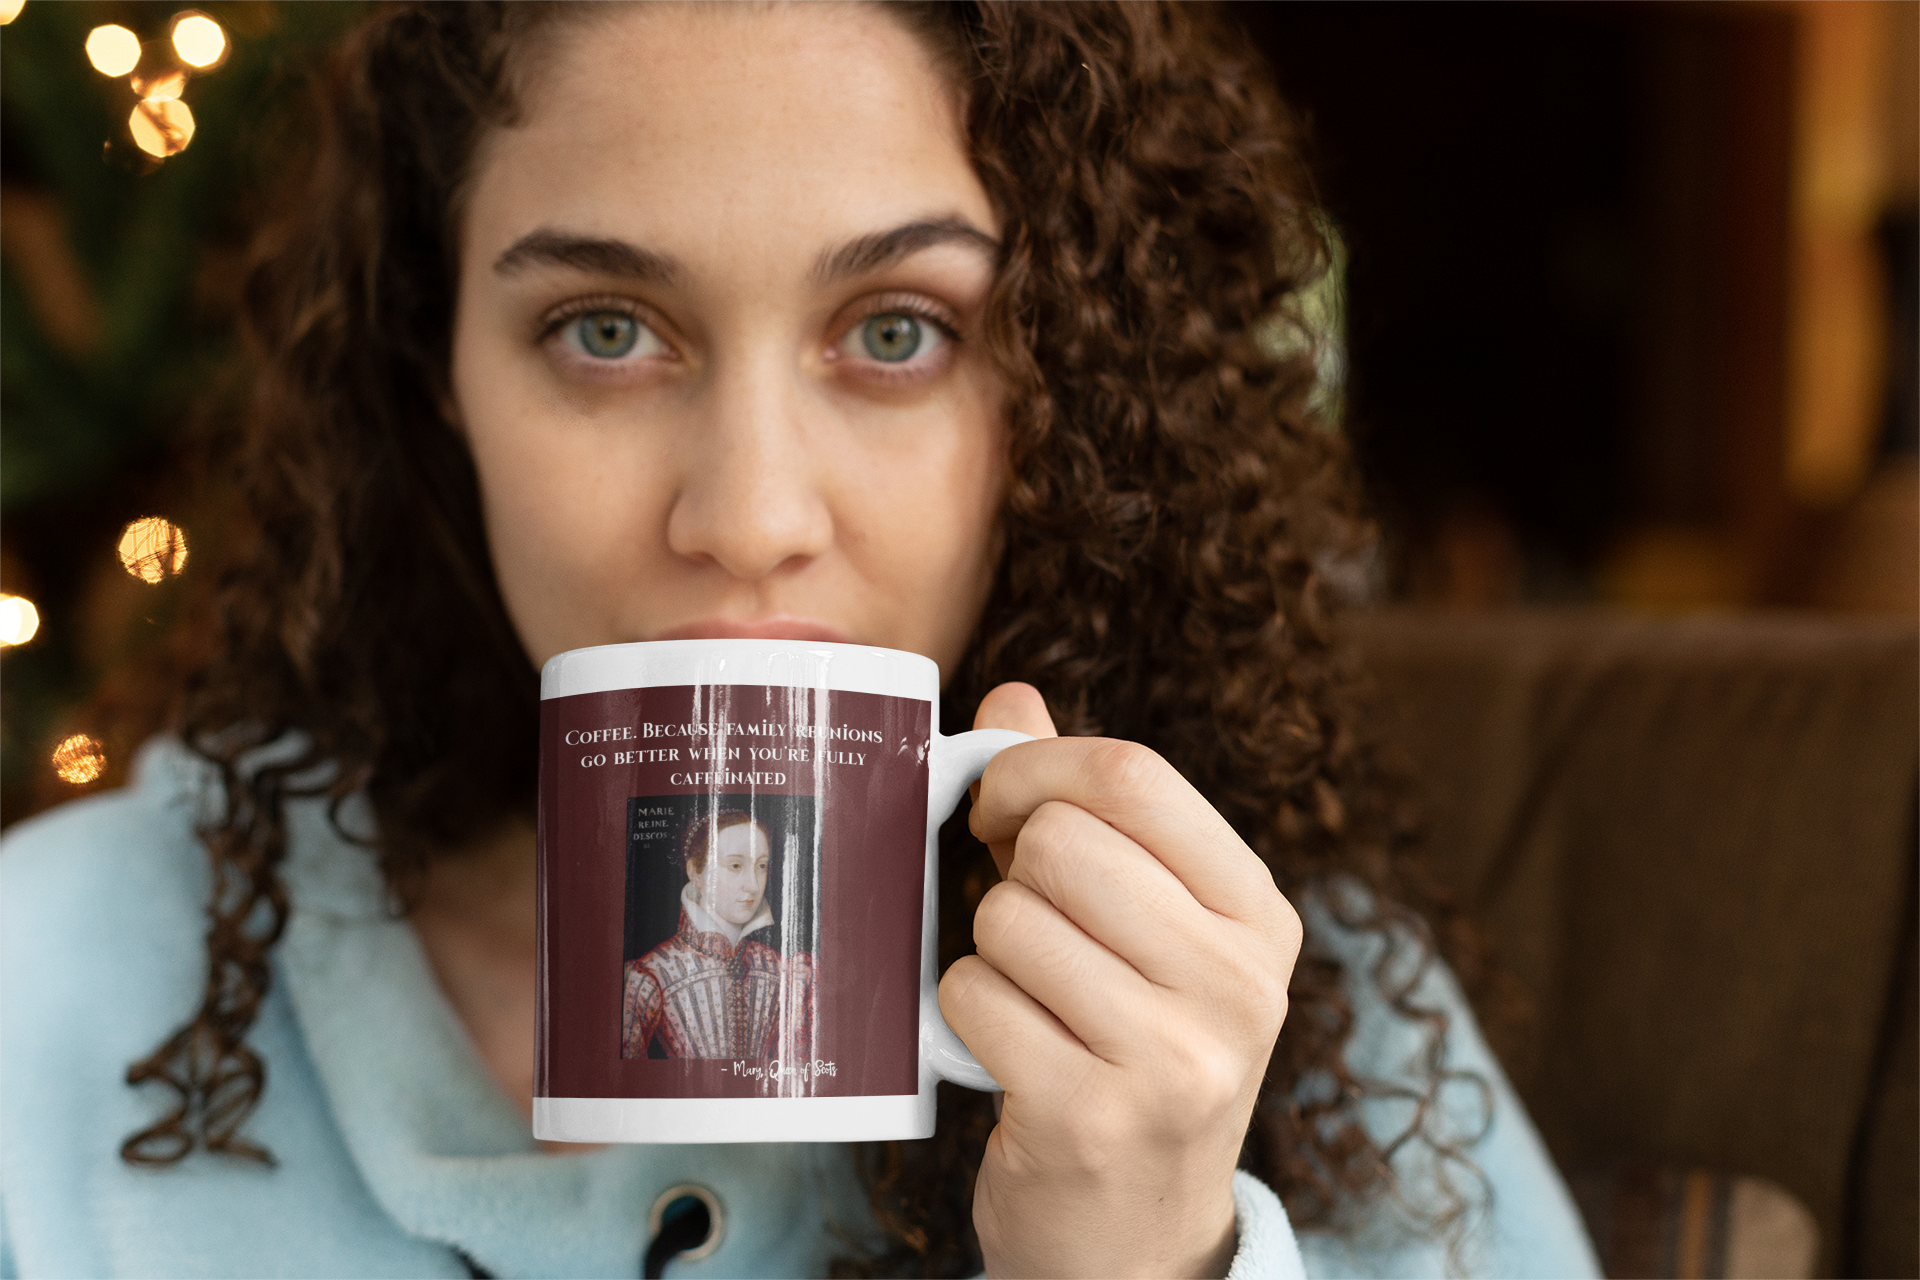 Coffee On The Go. Beautiful Young Woman Holding Coffee Cup And